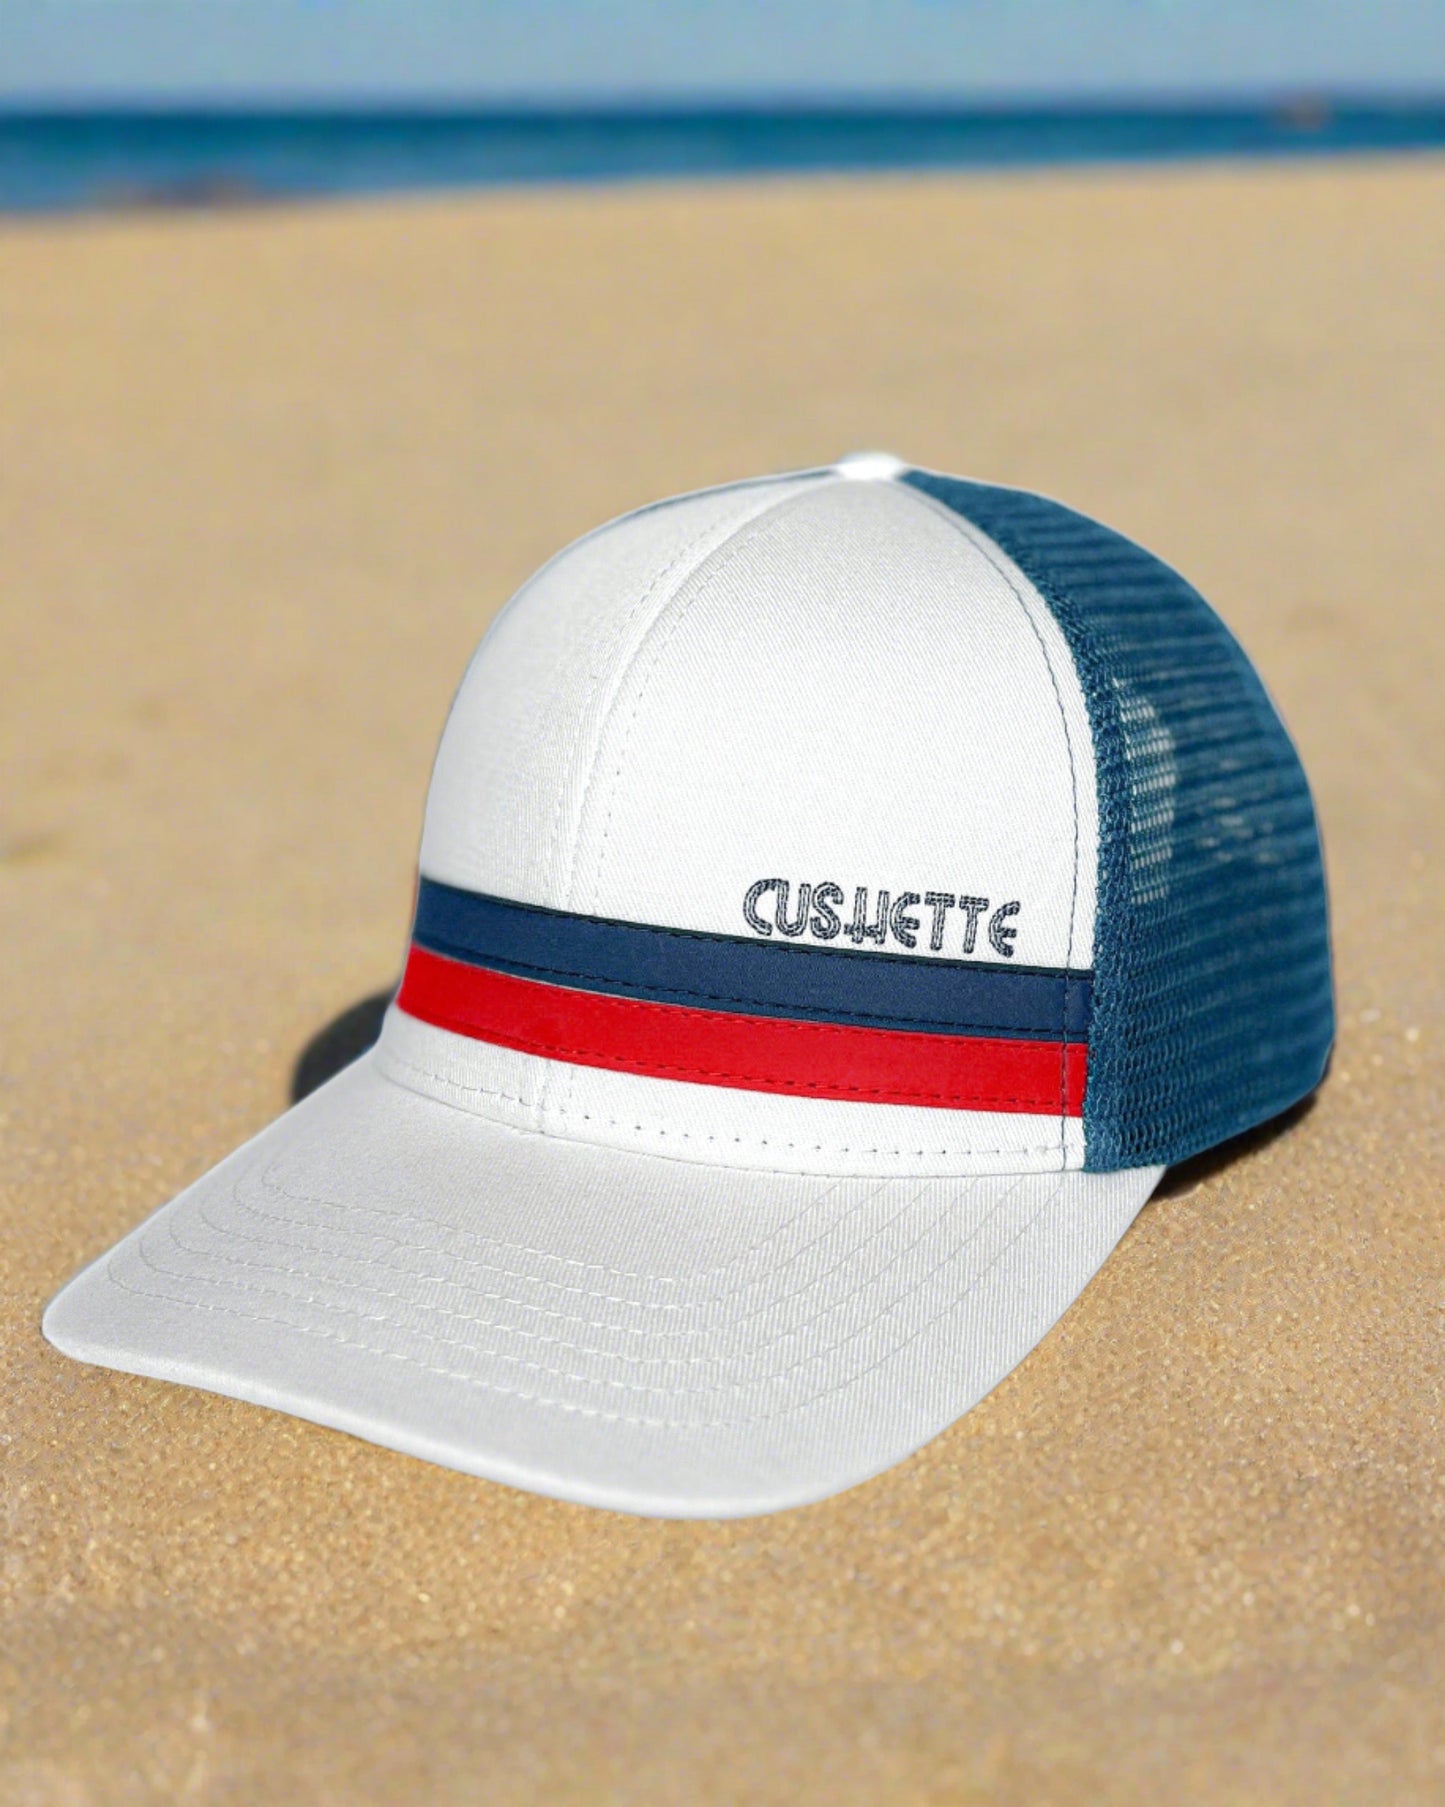 Red white and blue mesh trucker hat